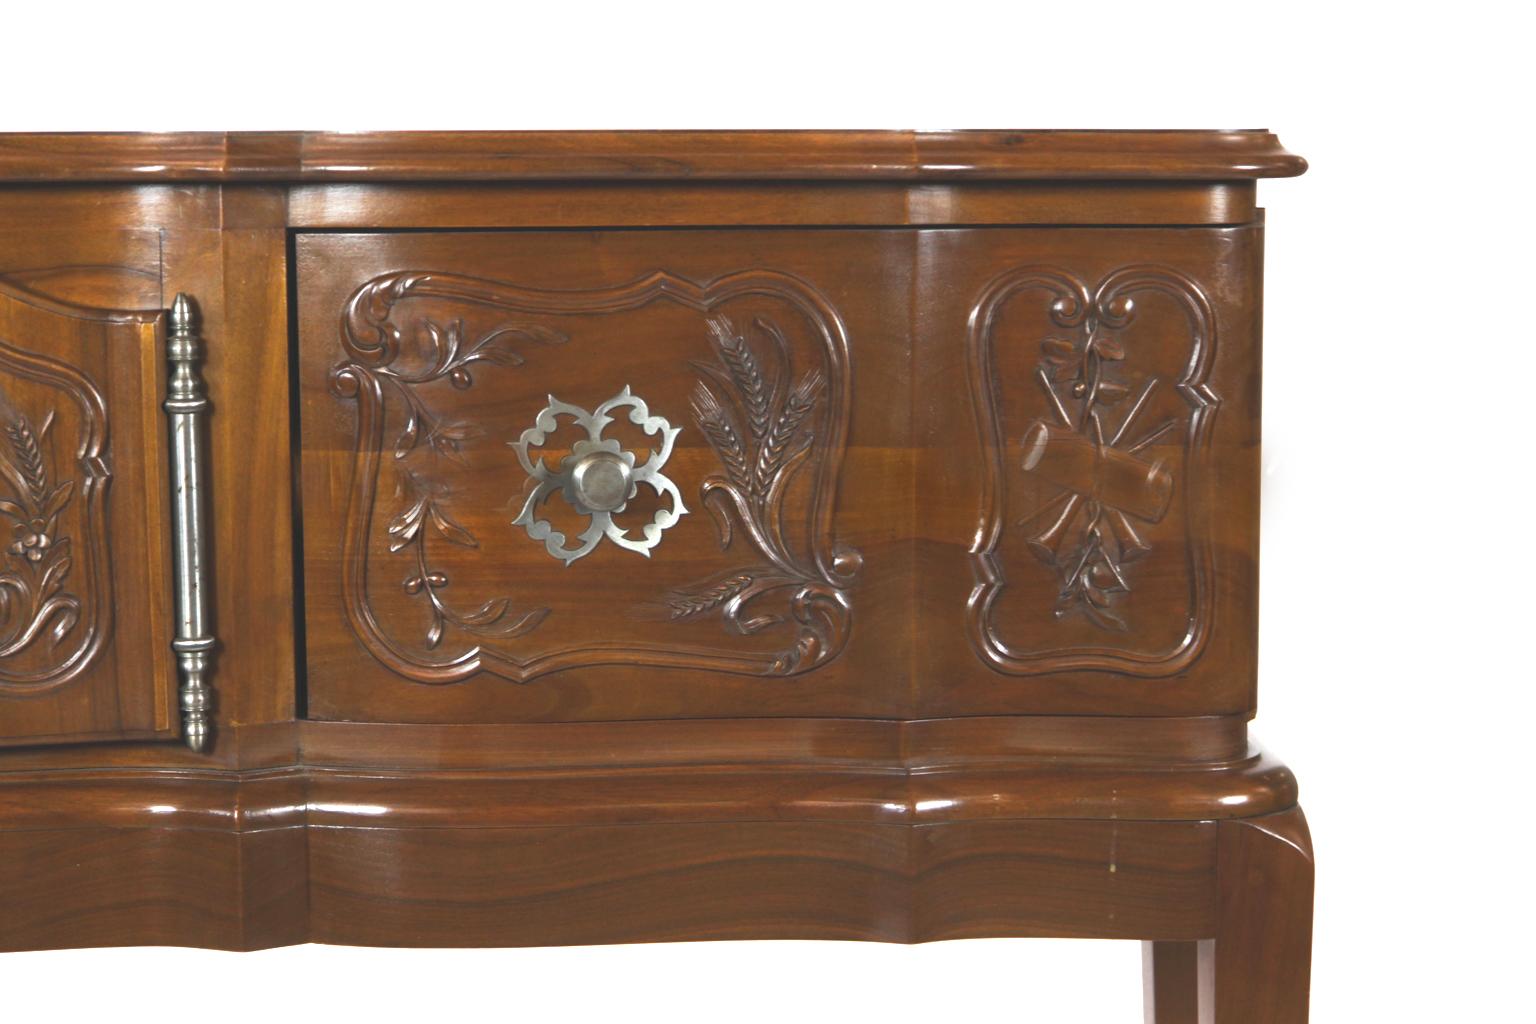 French cherry hall console table, with multi-shaped front, carved doors slide to the side with steel knobs, double center carved doors with steel escutcheons, on tapered legs.